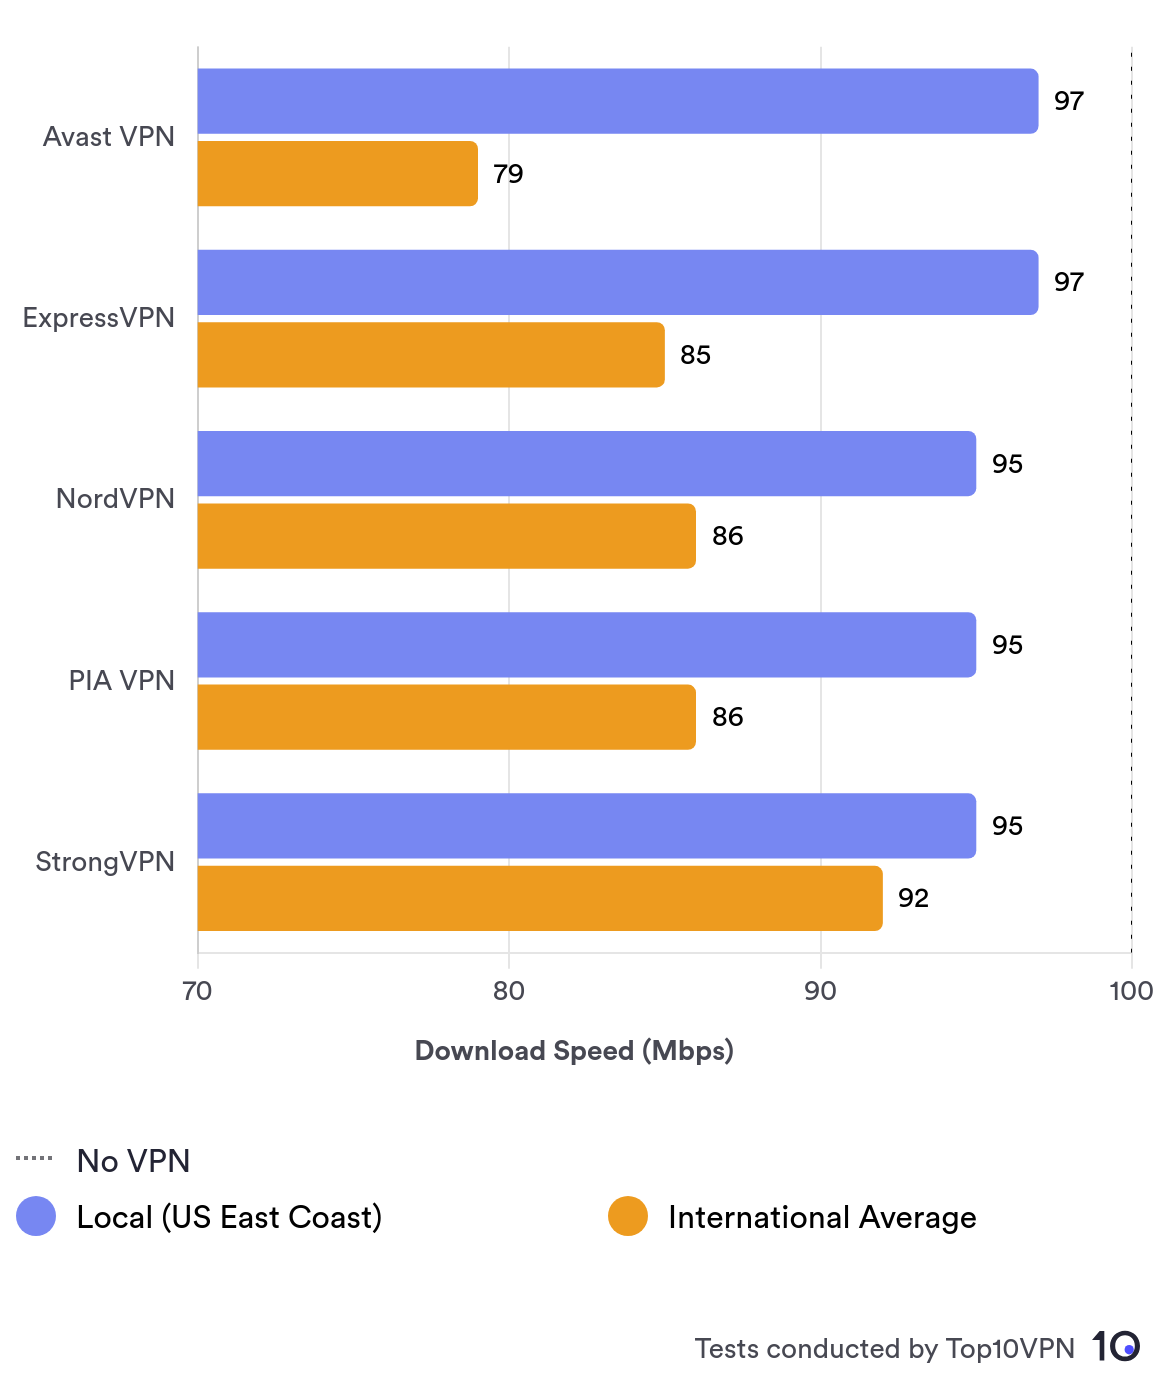 Bar Chart Comparison of Avast VPN With Other Leading VPNs.